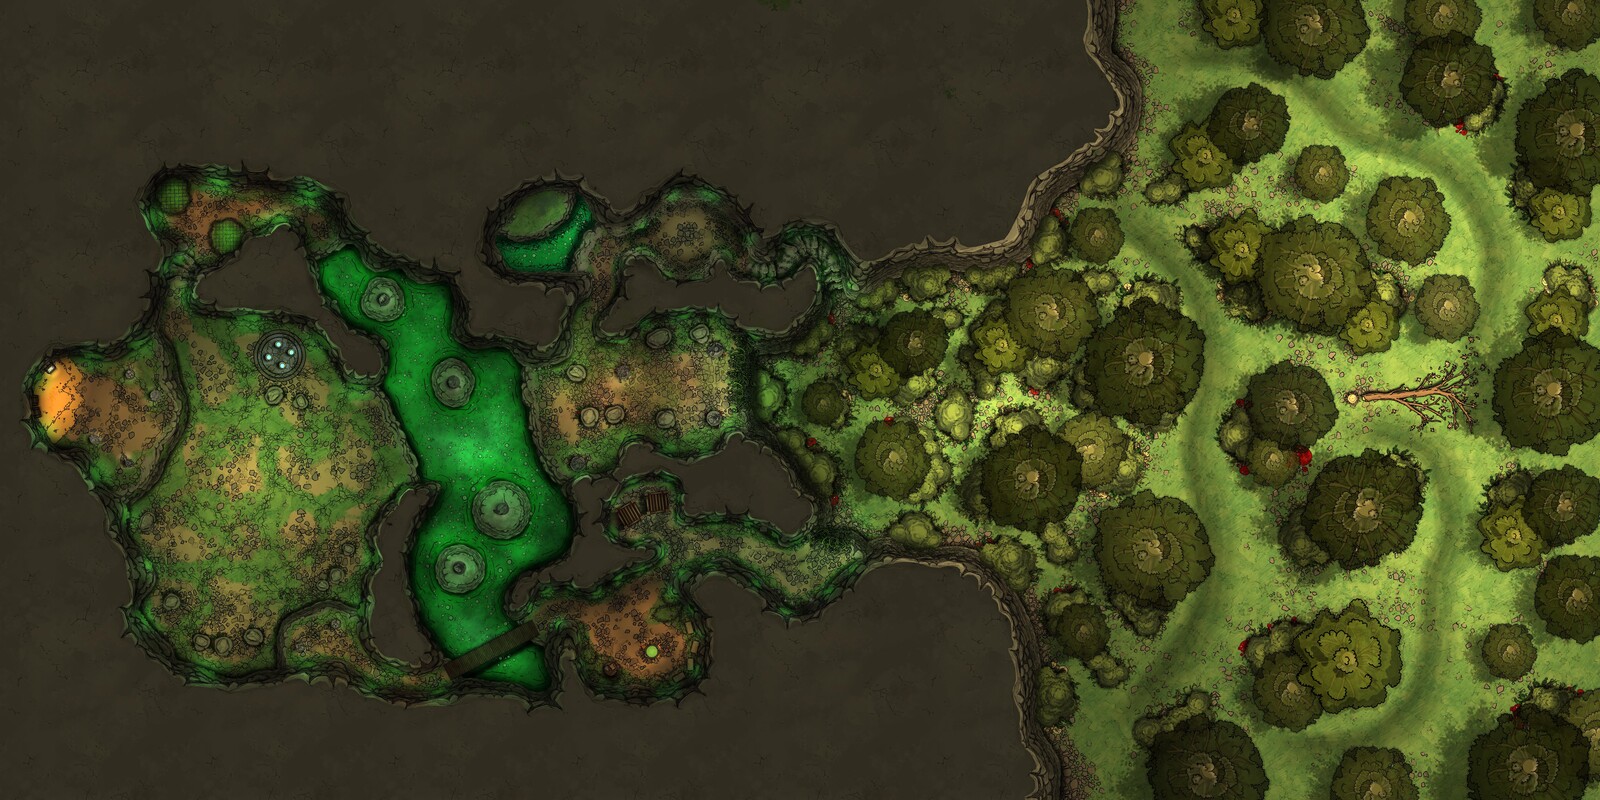 Green Dragon Lair from SDW [140 x 70]